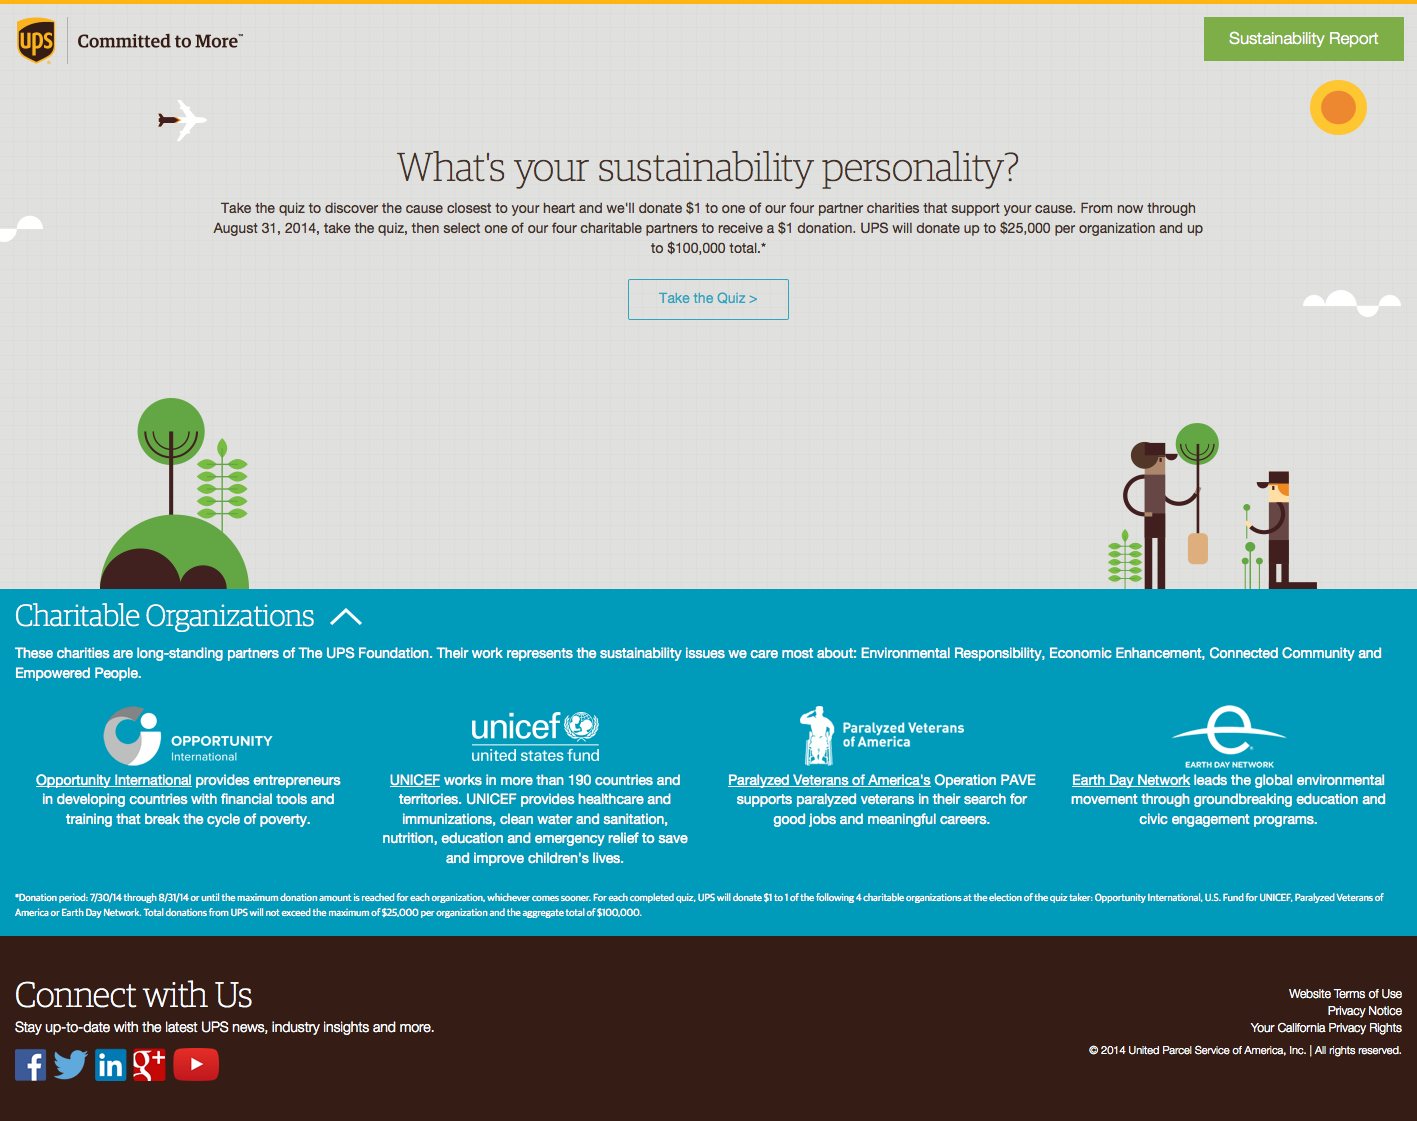 Discover Your Sustainability Personality | UPS Sustainability 2014-08-26 10-02-32.png